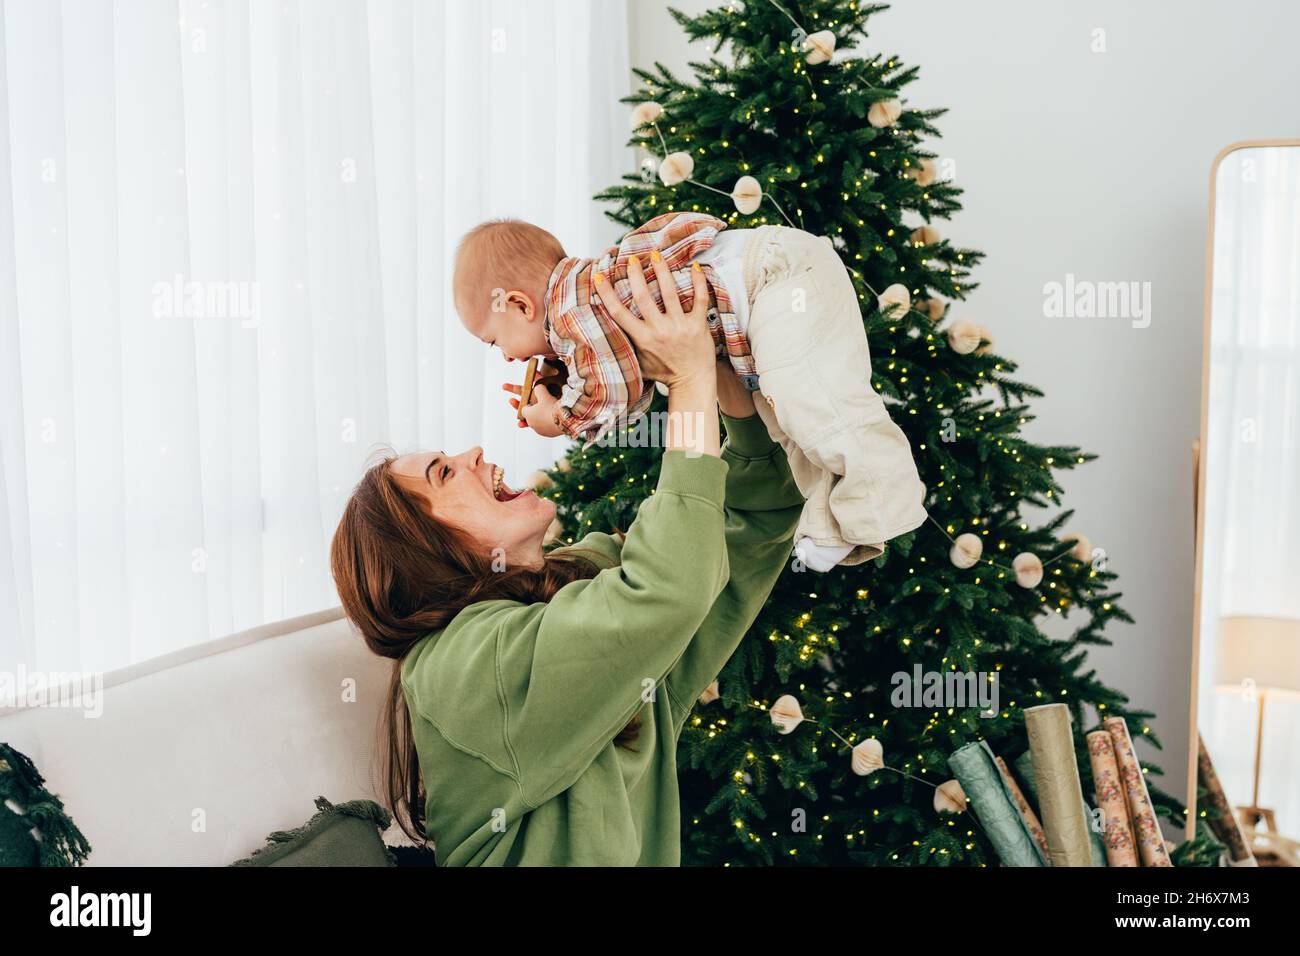 A young red-haired mother plays and has fun with her baby, raising her daughter above her head. Family christmas at home. Stock Photo